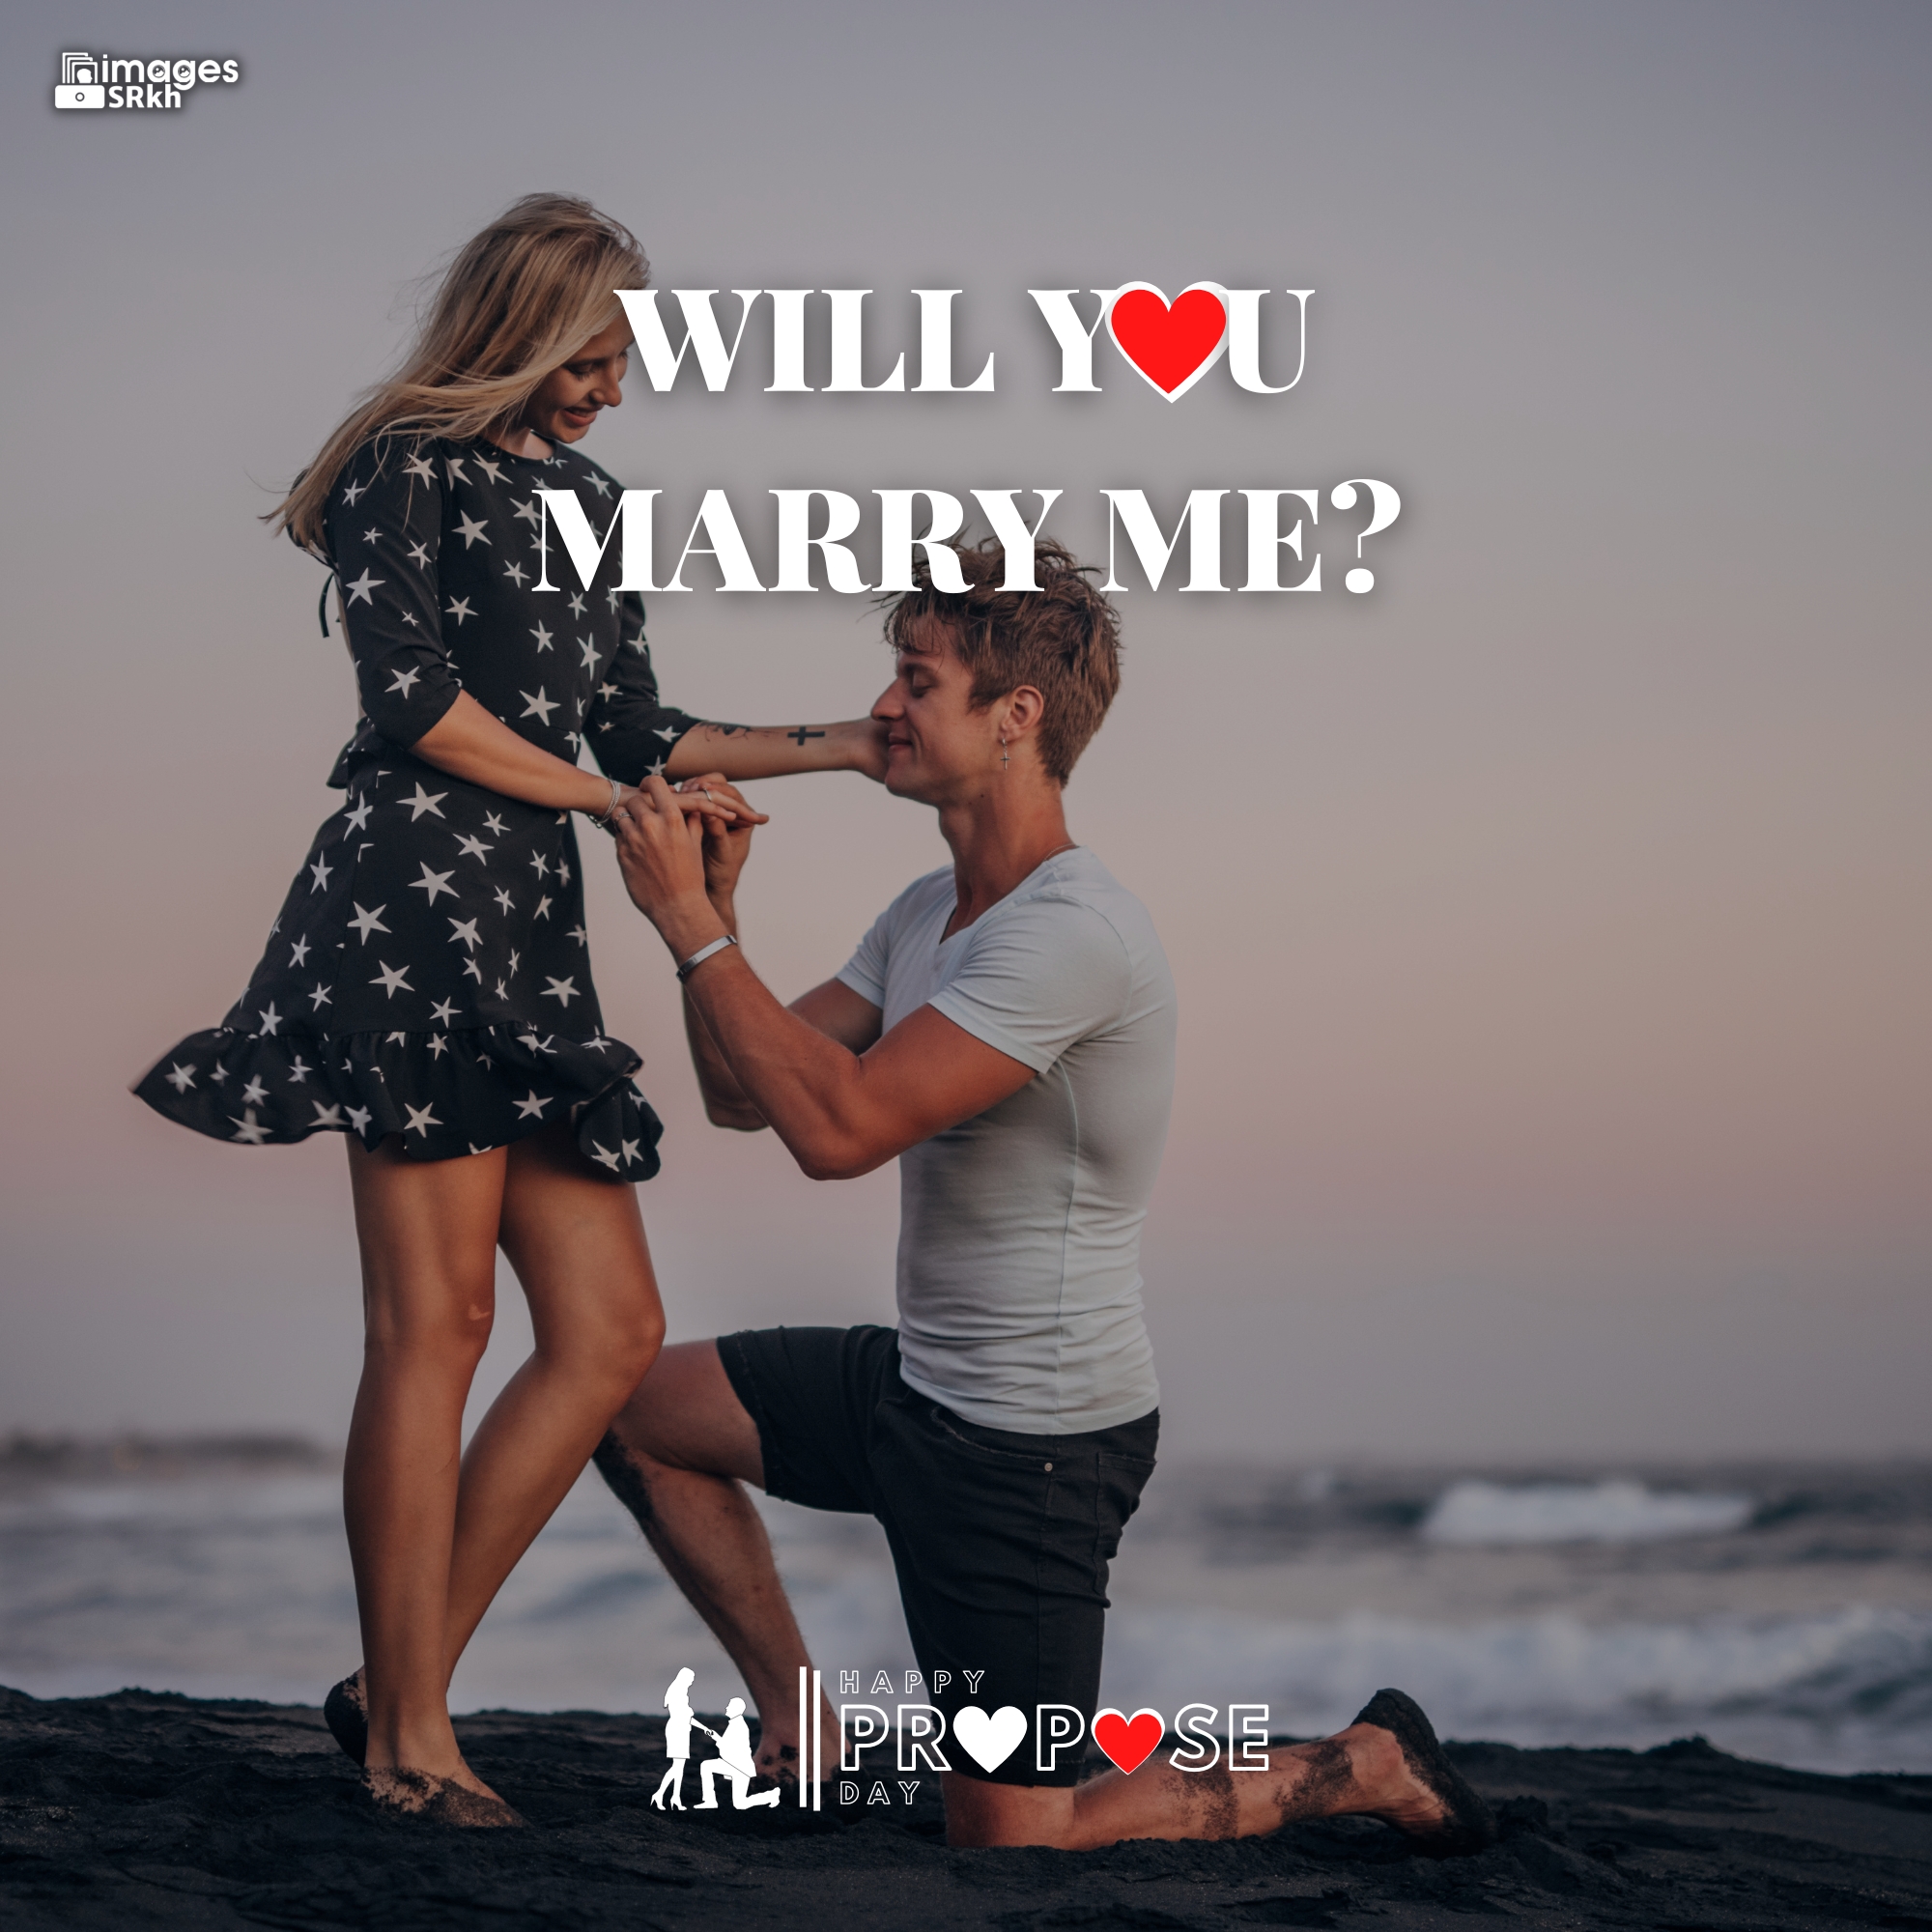 Propose Day Images | 264 | Will You MARRY ME